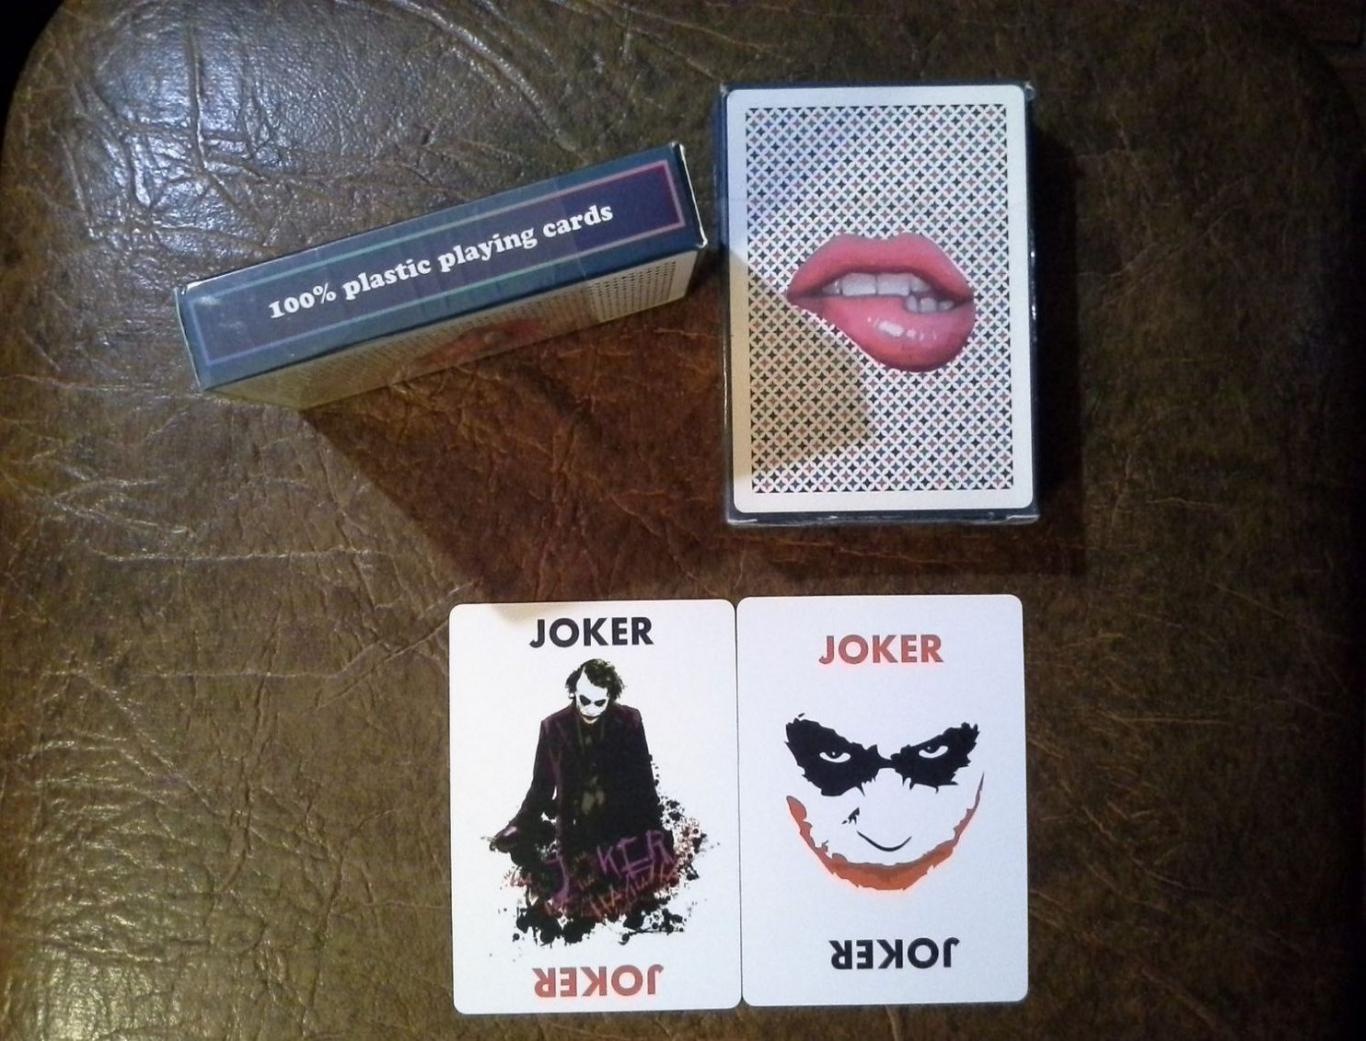 Casino cards not new exclusive